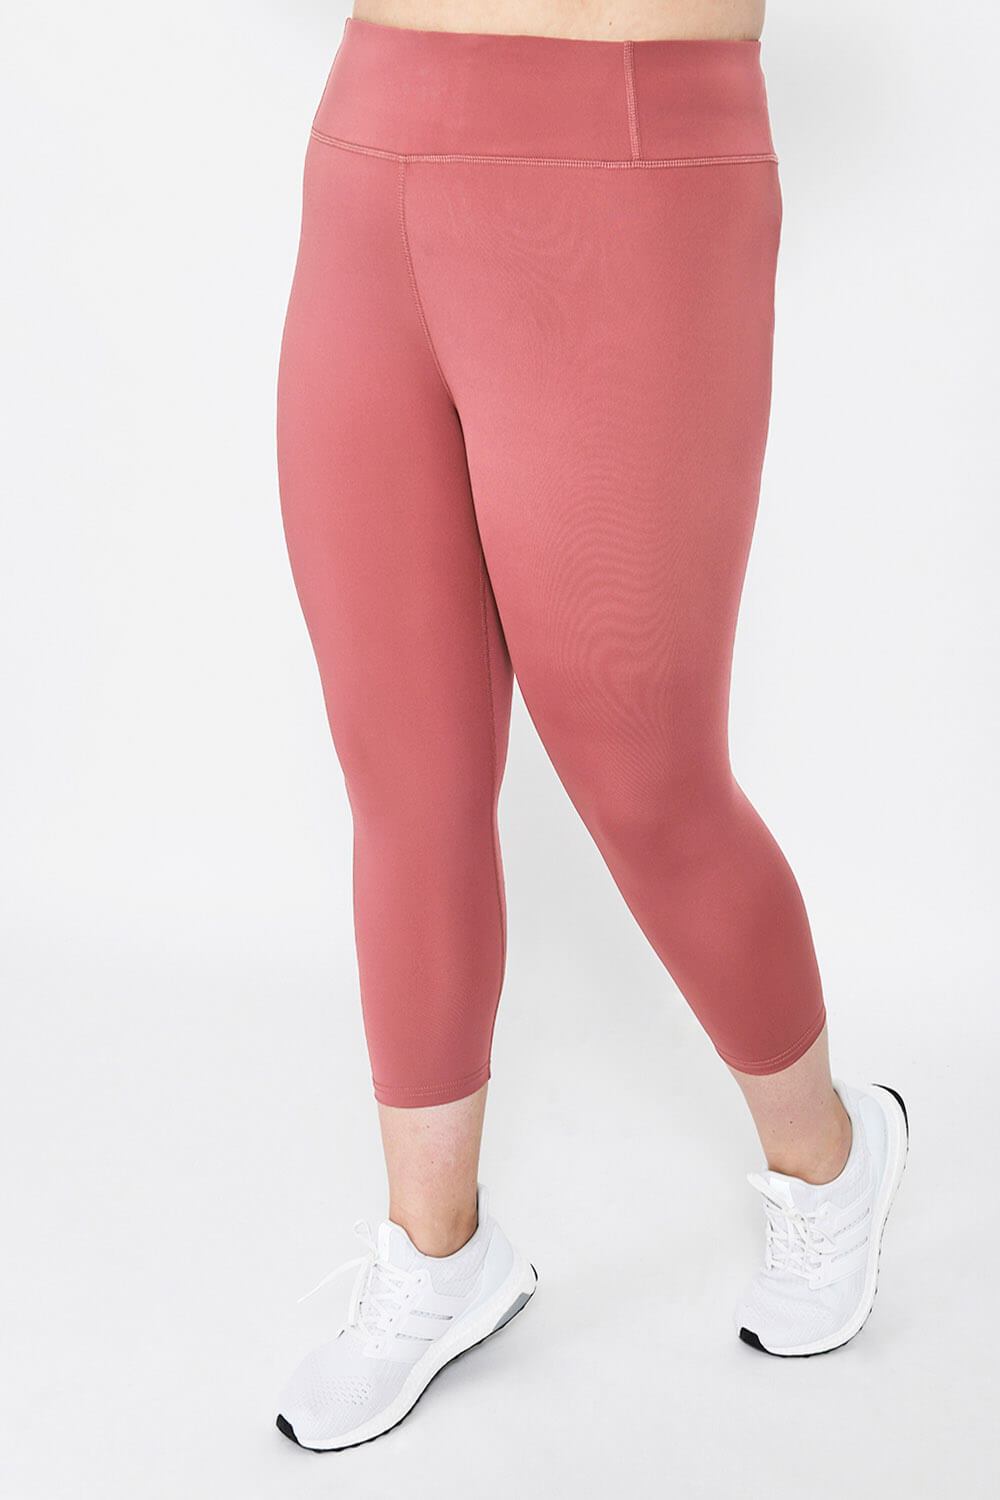 Plus Size Focus Cropped High Waisted Sports Leggings--Dusty Pink